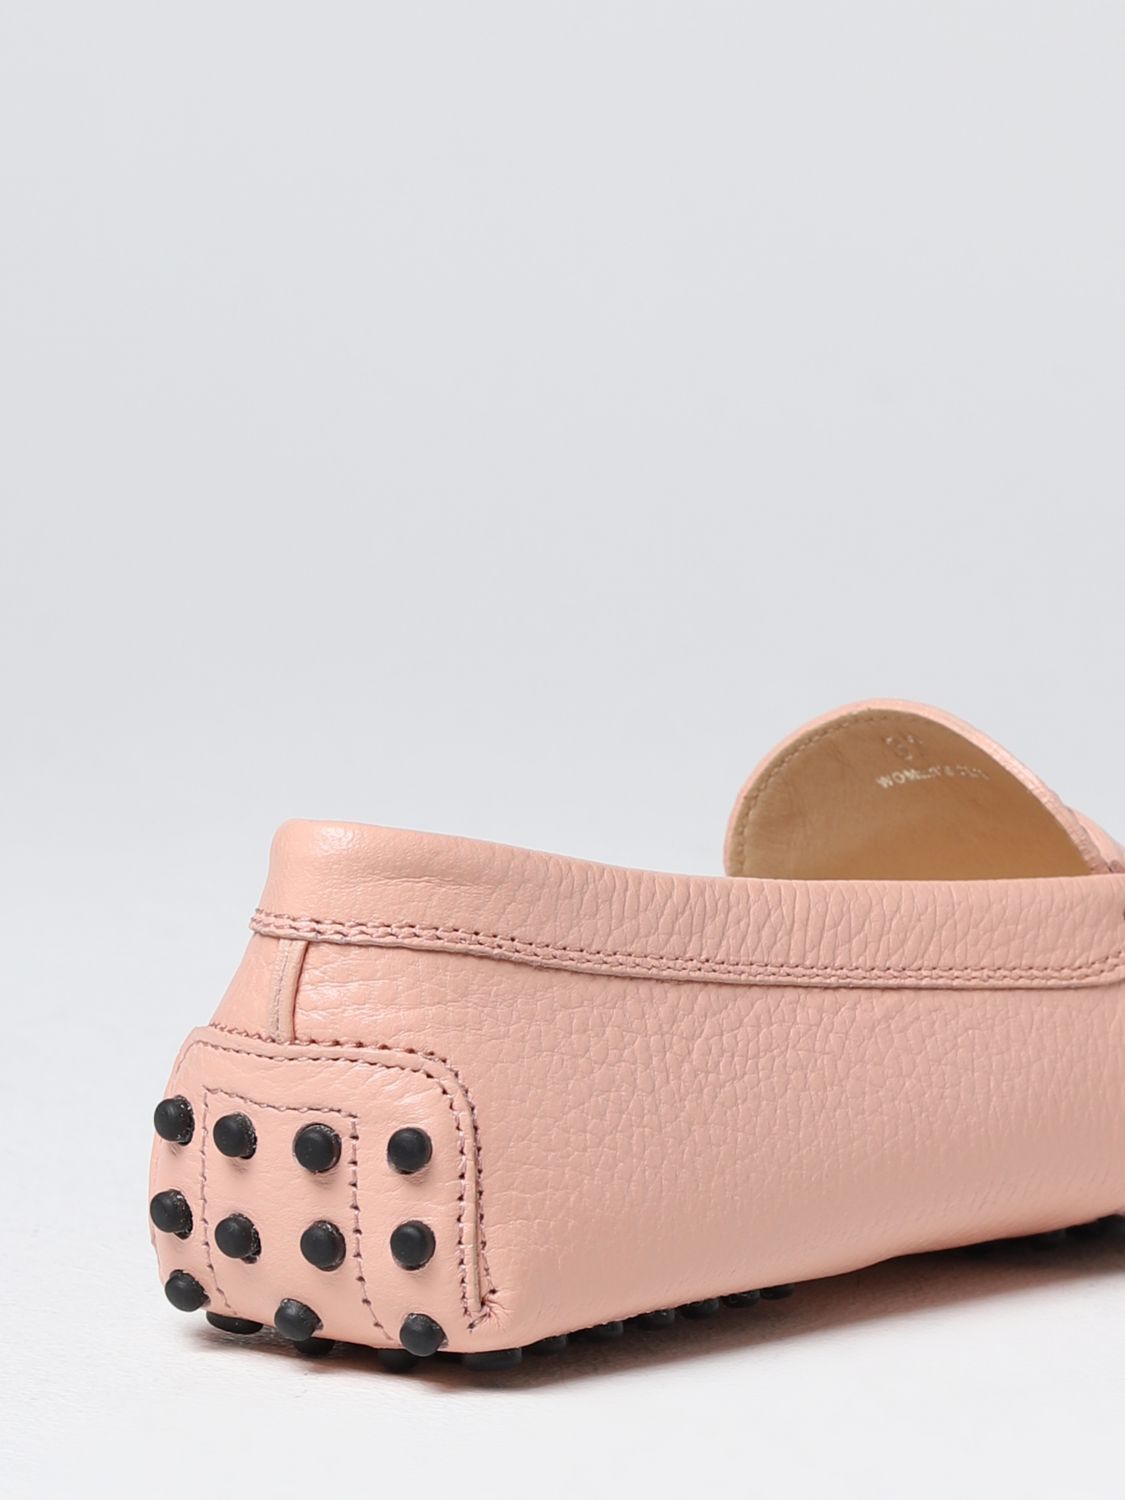 loafers woman - Pink | loafers XXW00G00010MBW online GIGLIO.COM